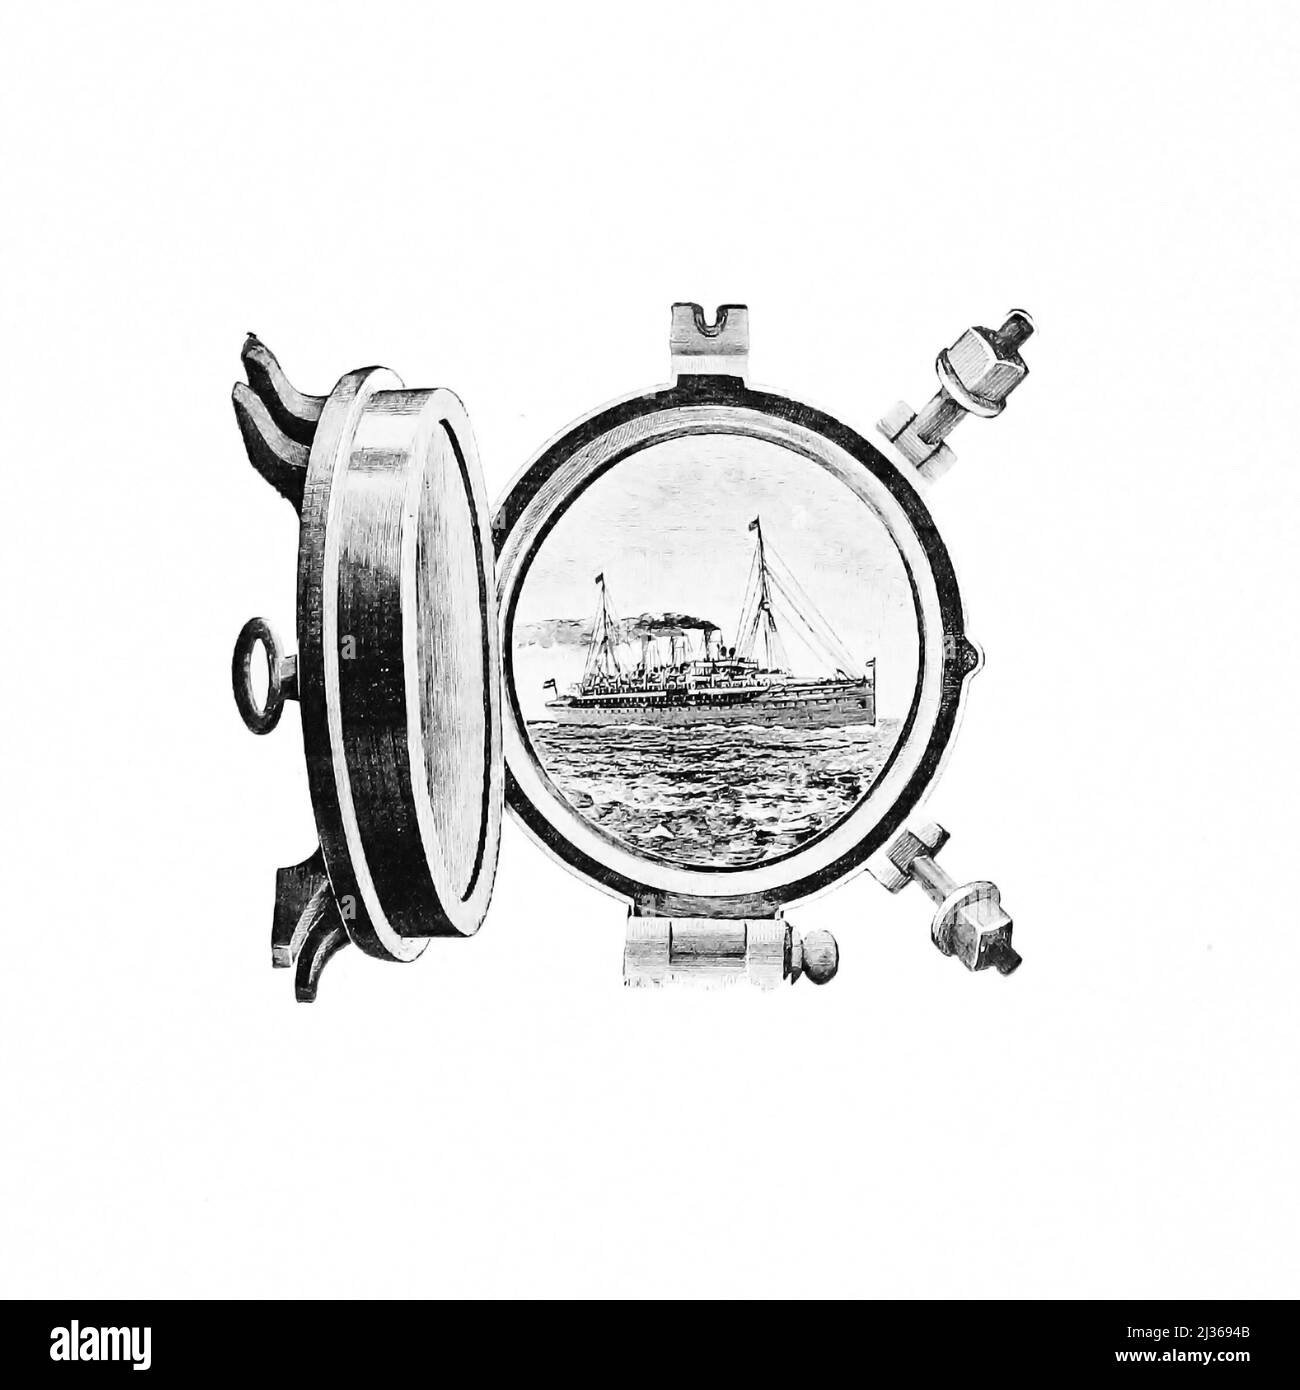 Porthole illustration frontispiece from the book ' Steam vessels and marine engines ' by G. Foster Howell, Publisher New York : American Shipbuilder 1896 Stock Photo